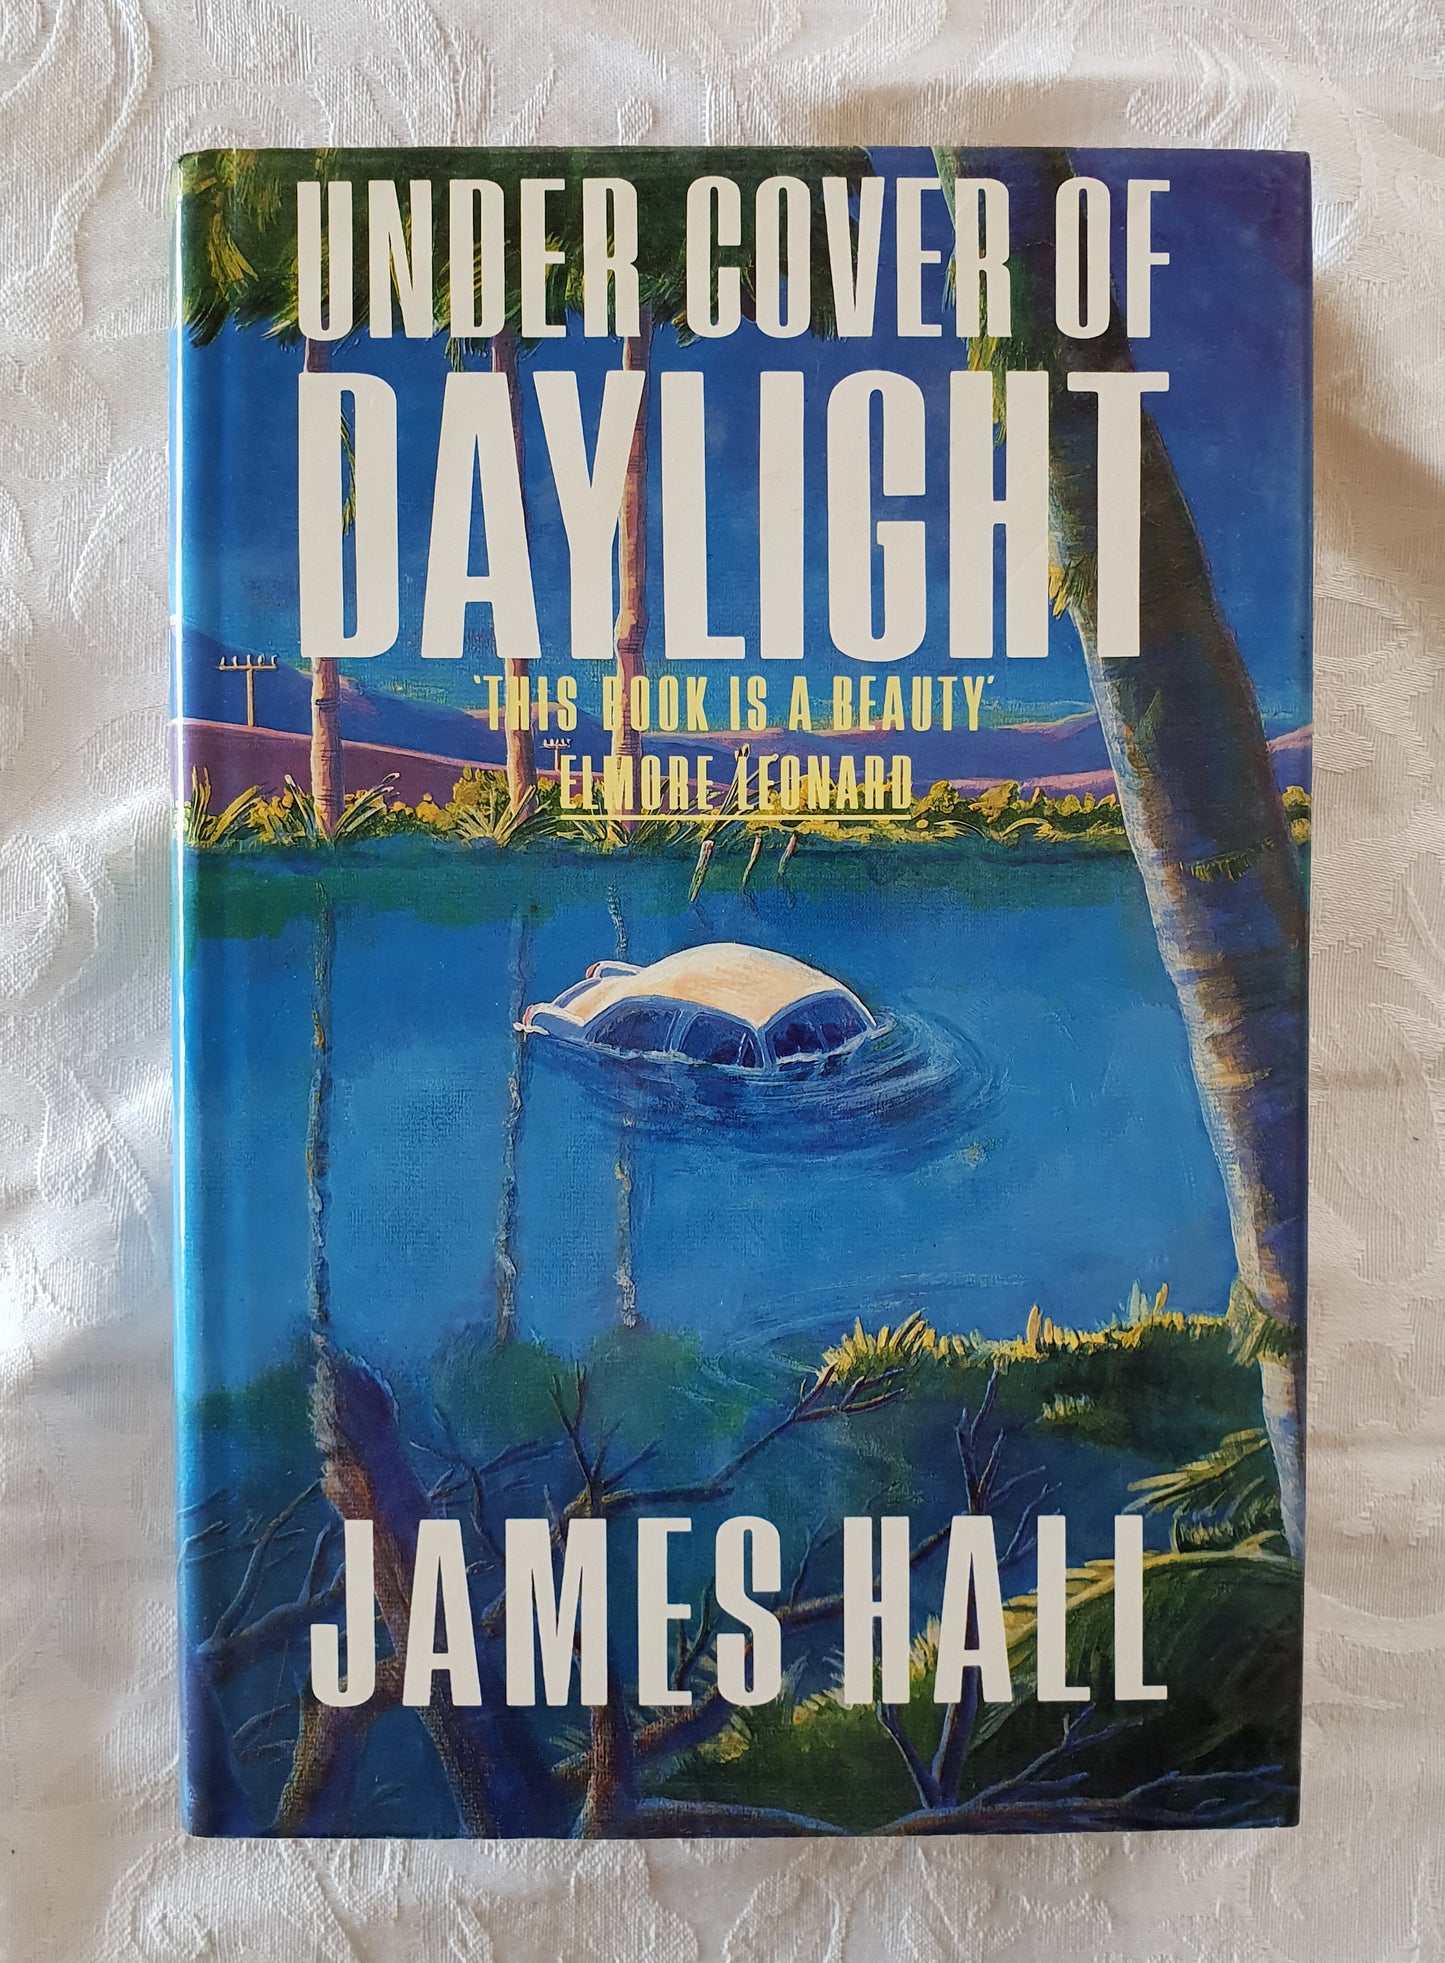 Under Cover of Daylight by James Hall